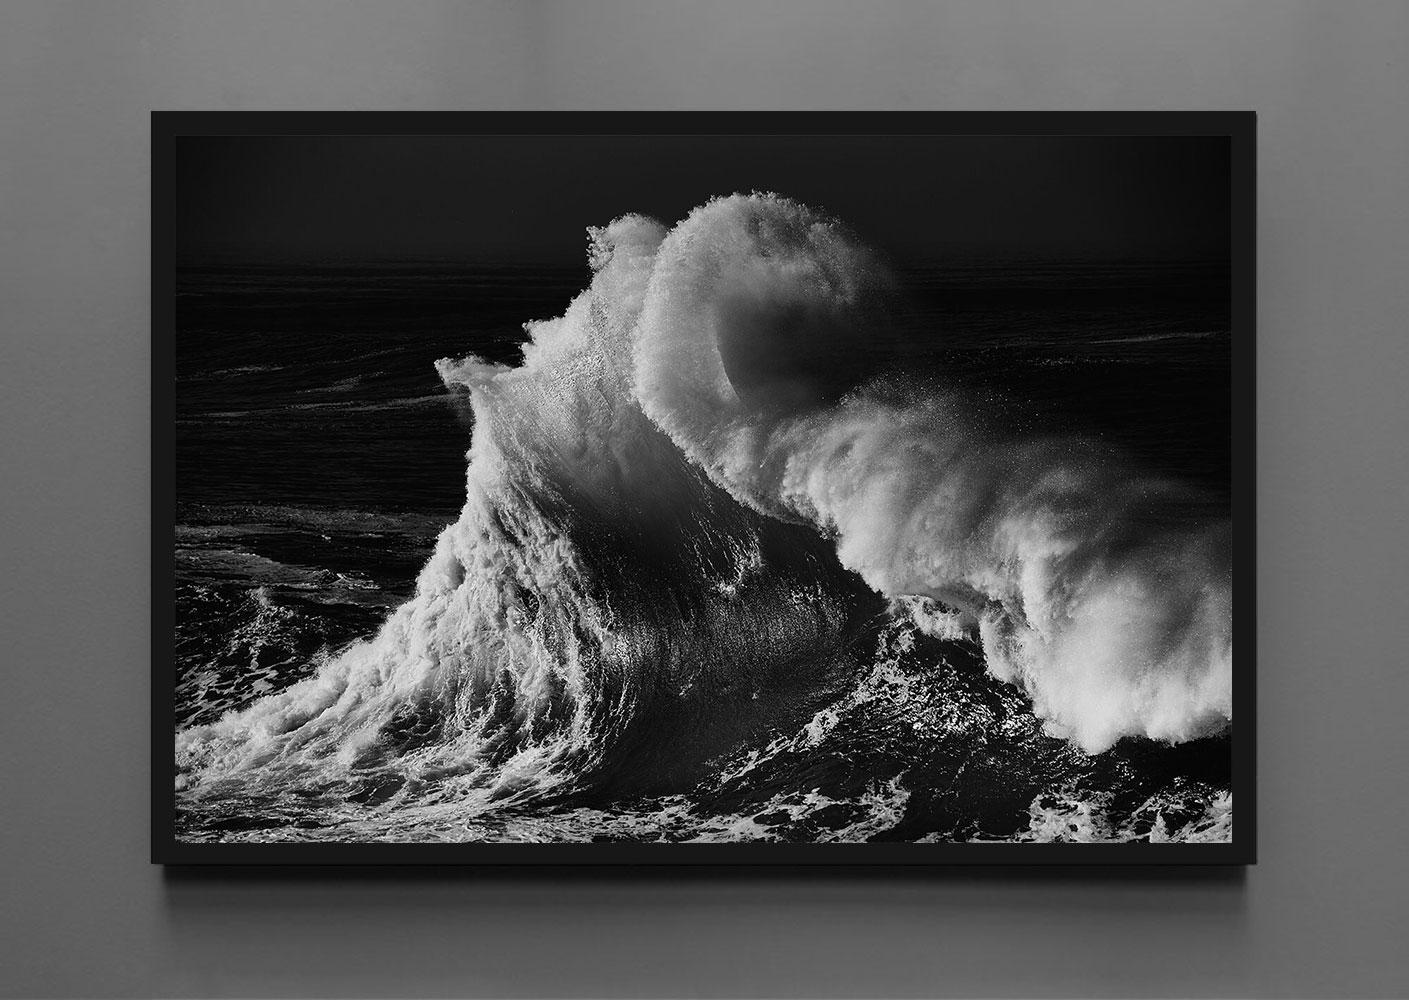 Mare 432 Seascape black and white photograph - Photograph by Alessandro Puccinelli